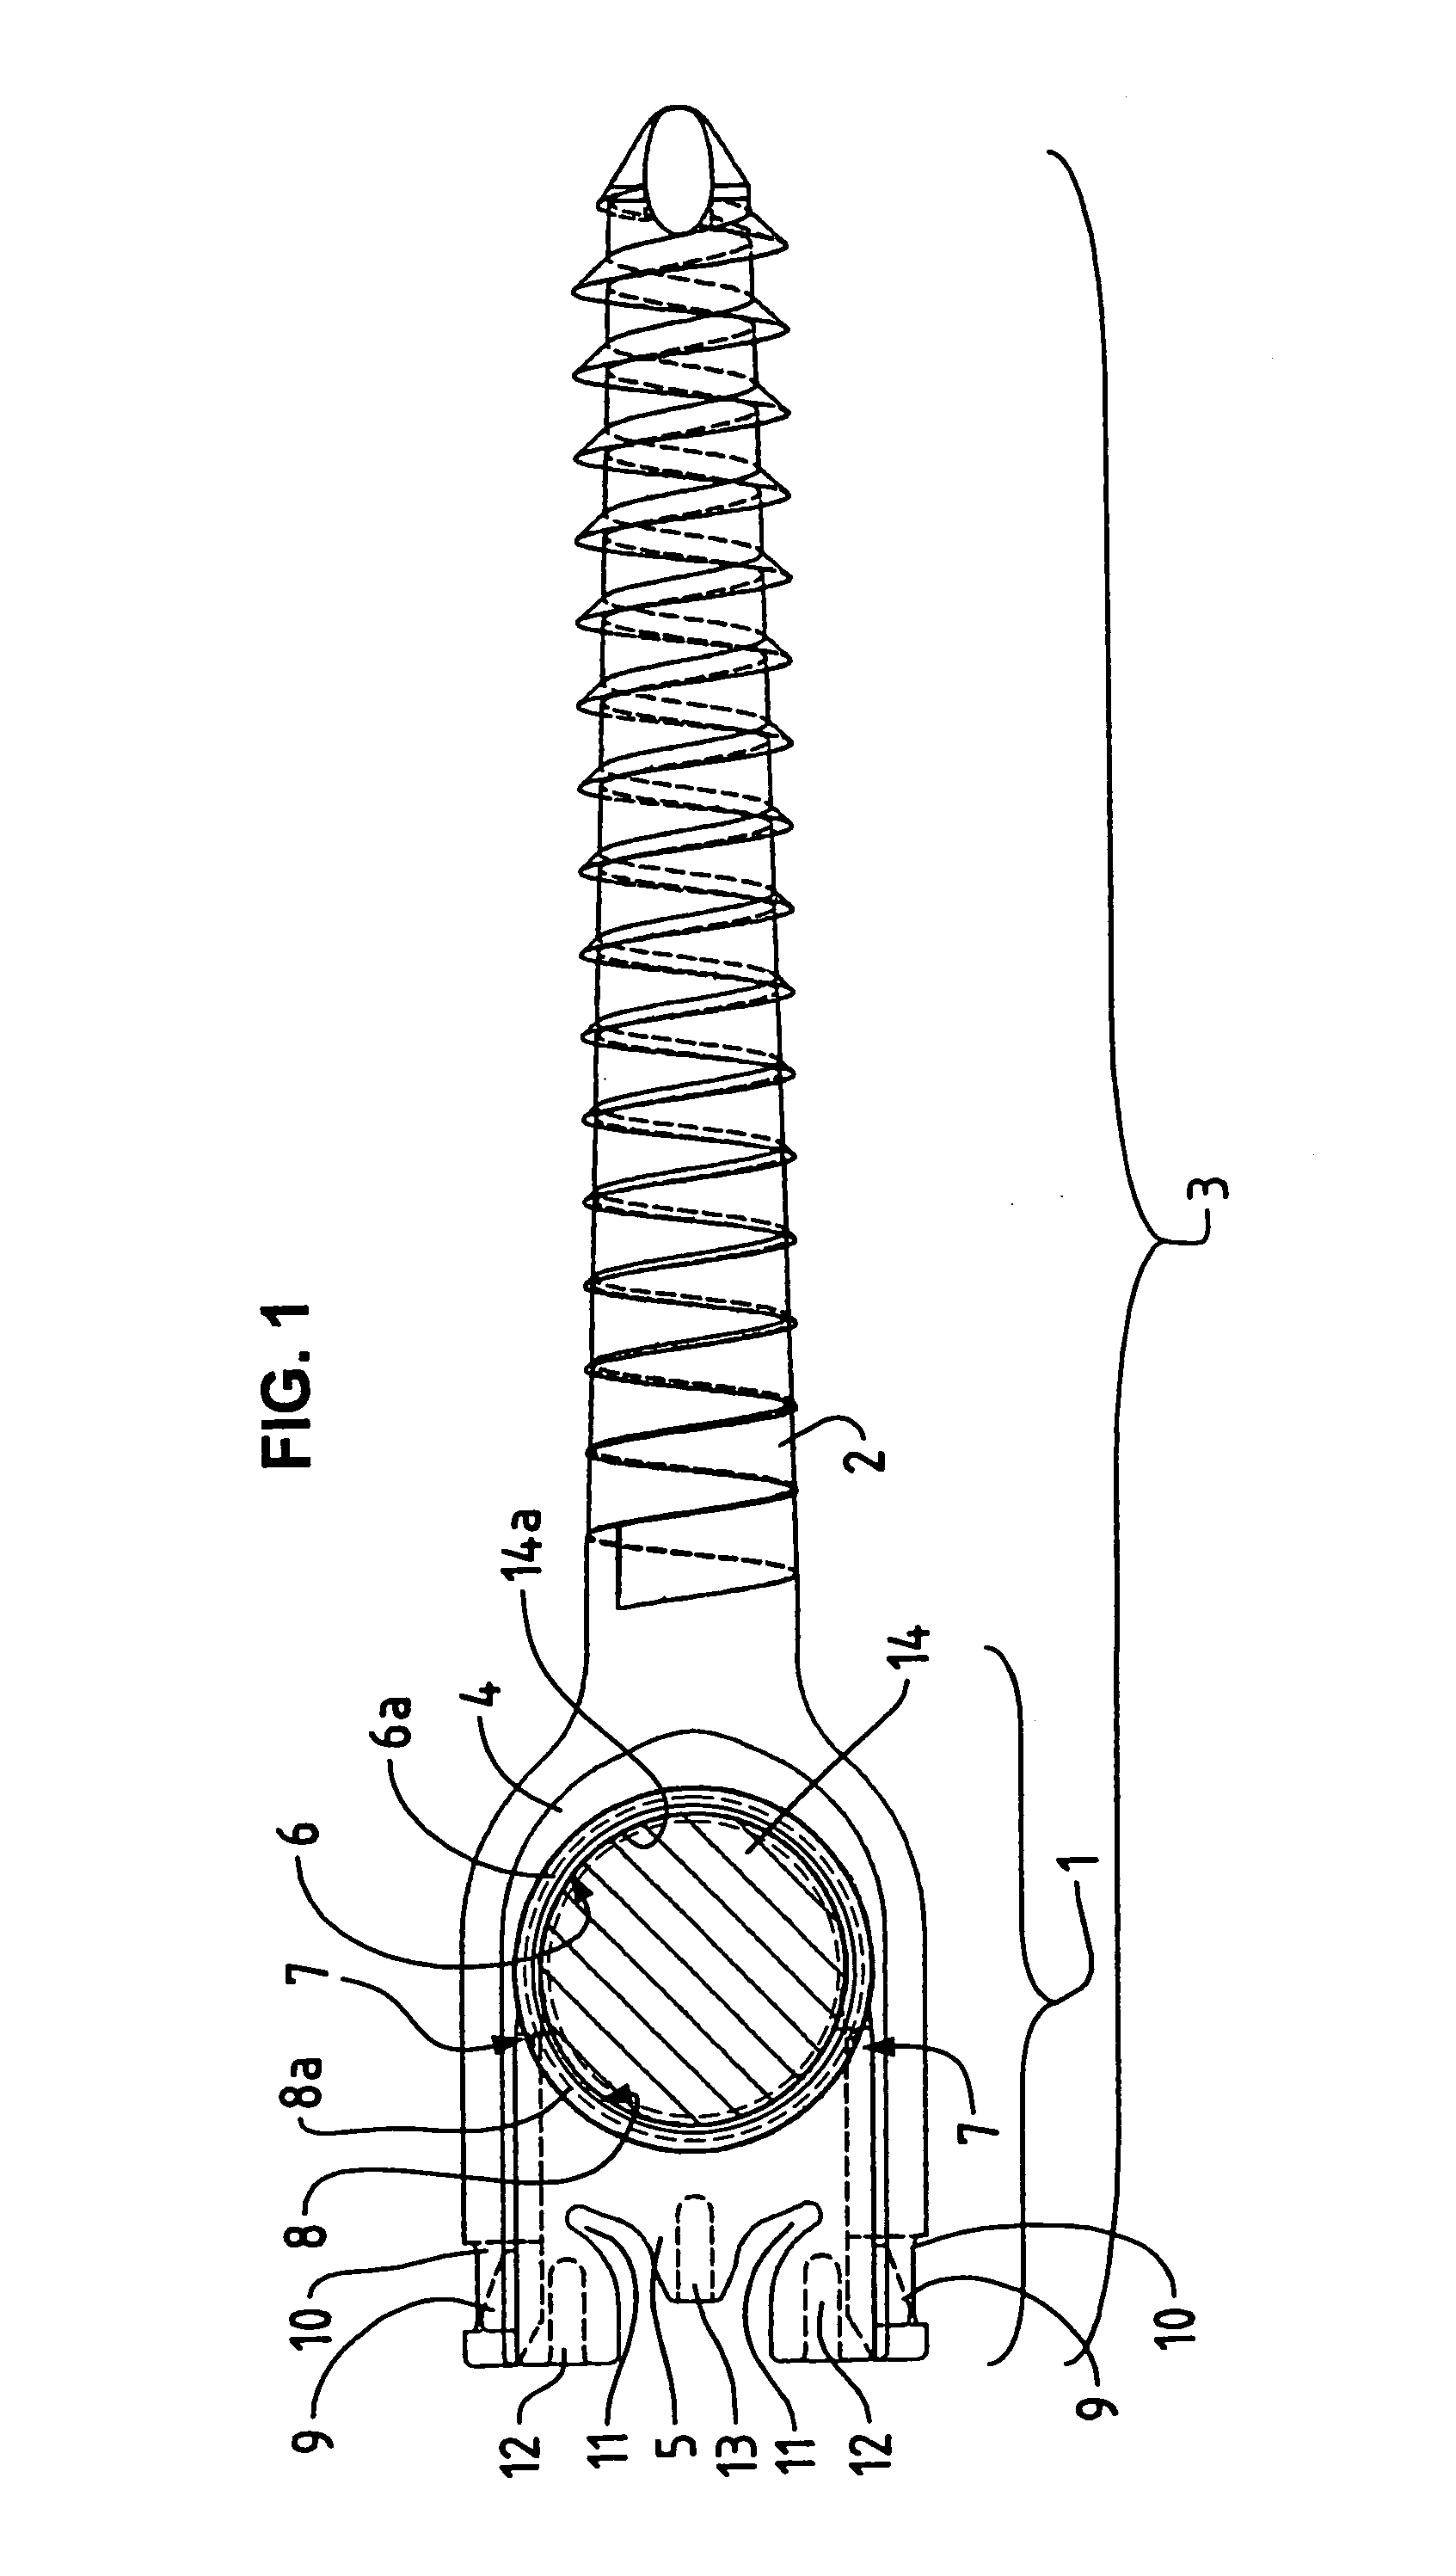 Pedicle screw with a closure device for the fixing of elastic rod elements